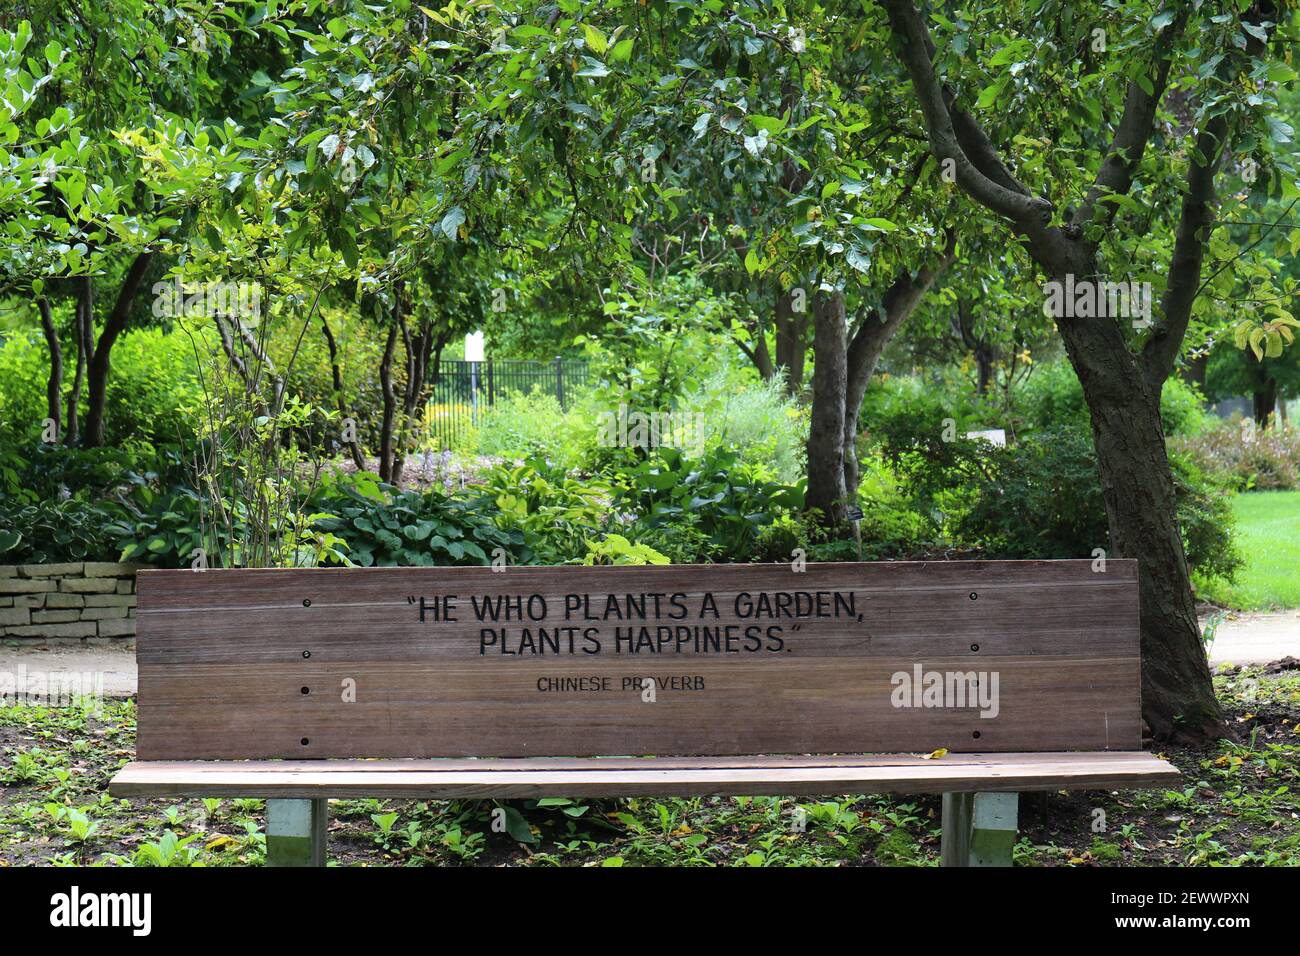 An engraved wood park bench with a Chinese Proverb  front of a shade garden  with trees and plants in a park in Wisconsin, USA Stock Photo